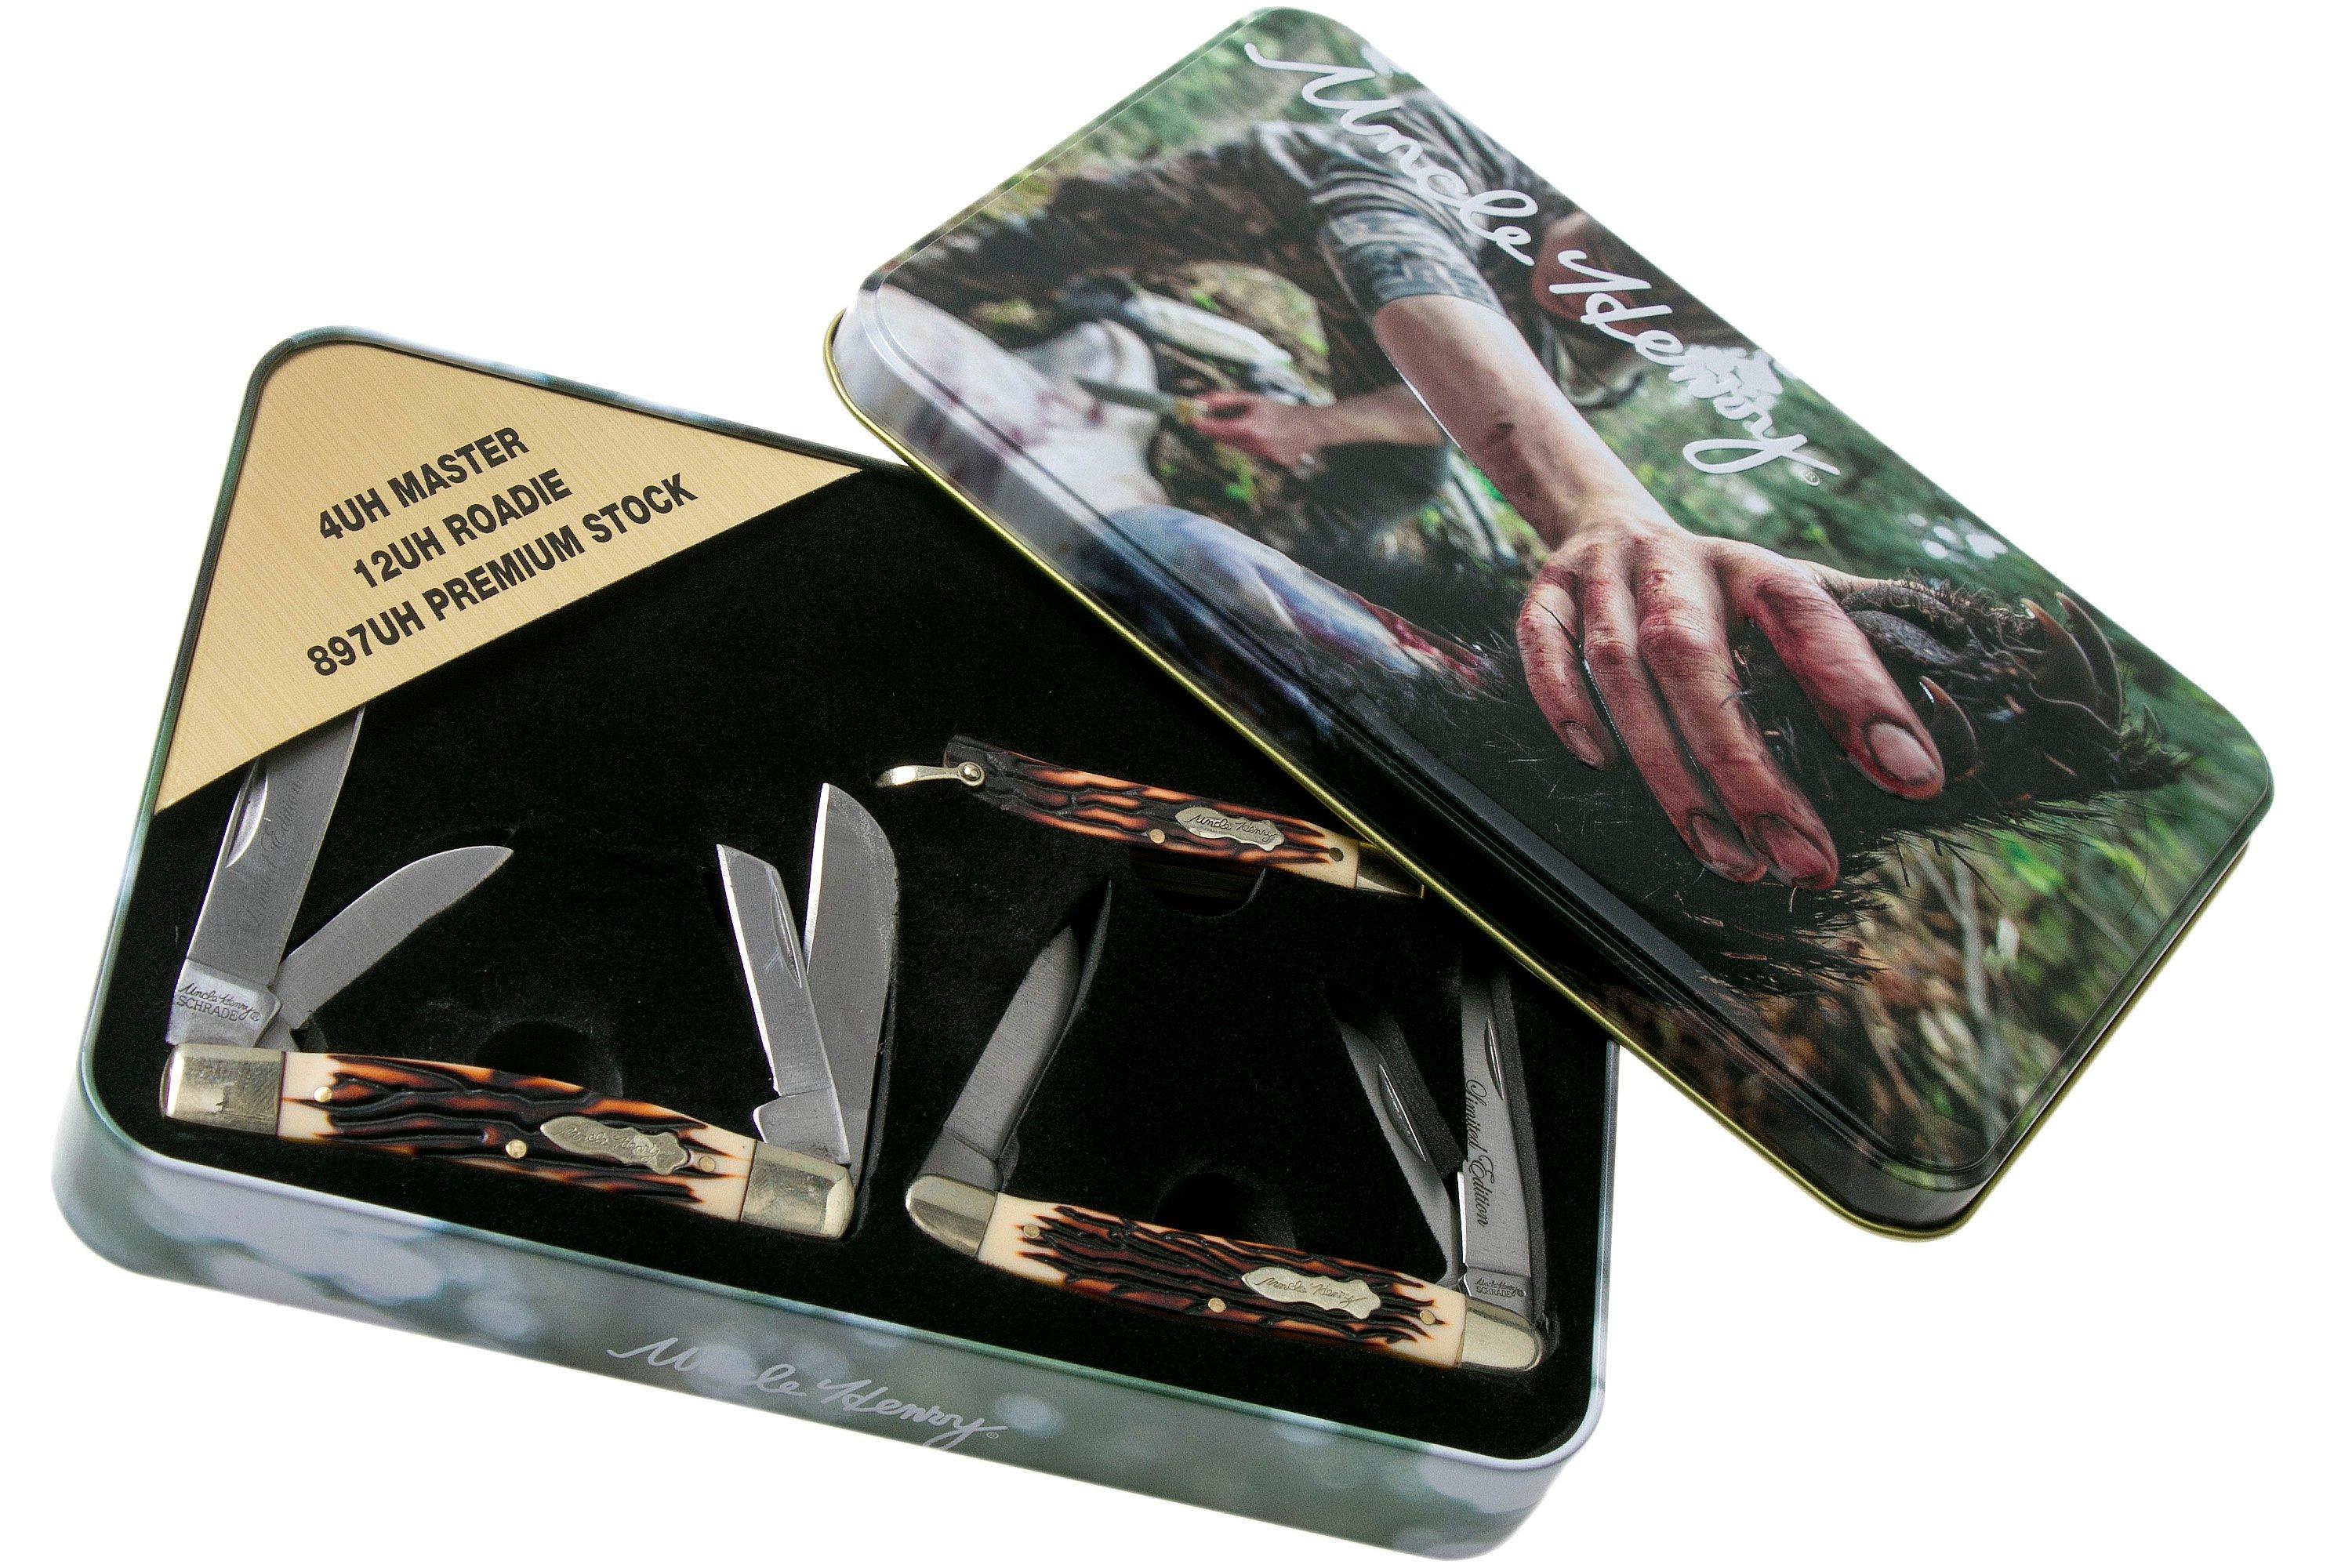 Uncle Henry Limited Edition Set 1130005 set of three pocket knives